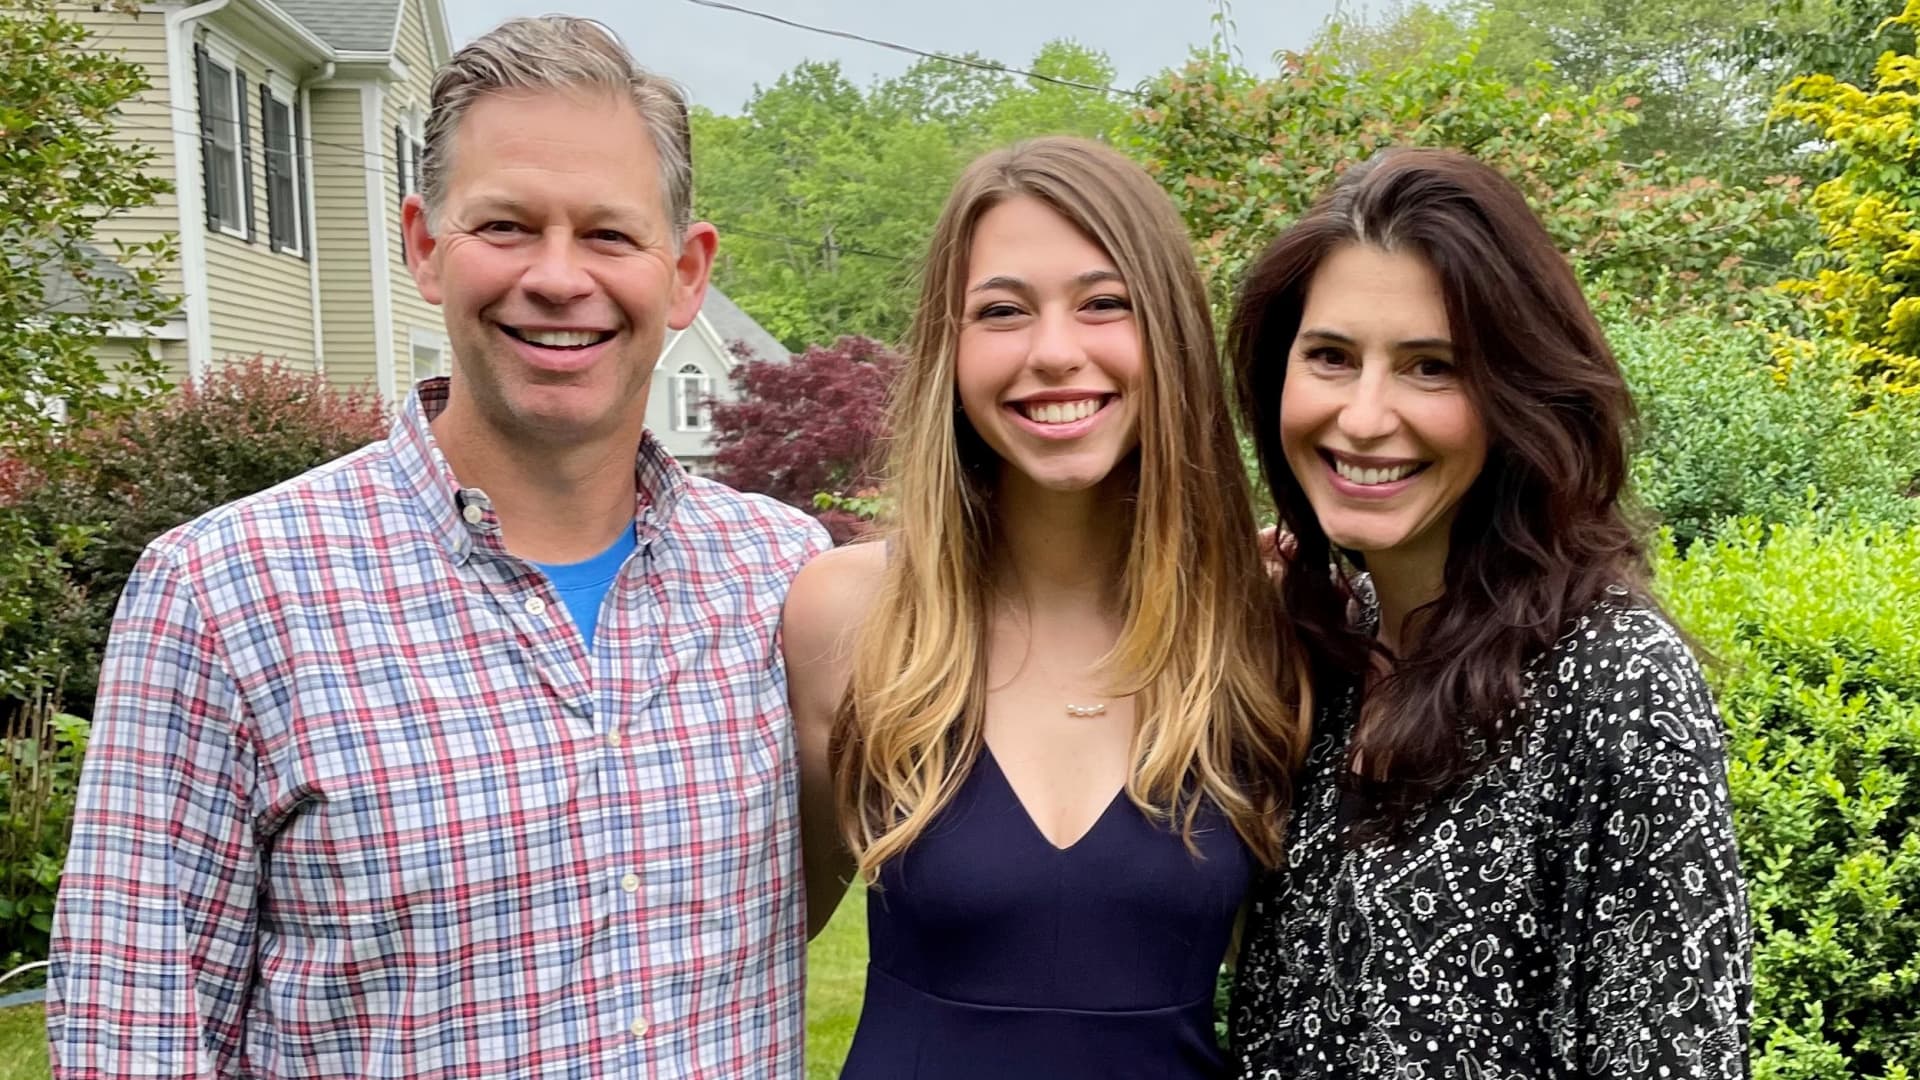 High school graduate Julia Hull (center) of Trumbull, Connecticut, with her parents Tom and Lauren.